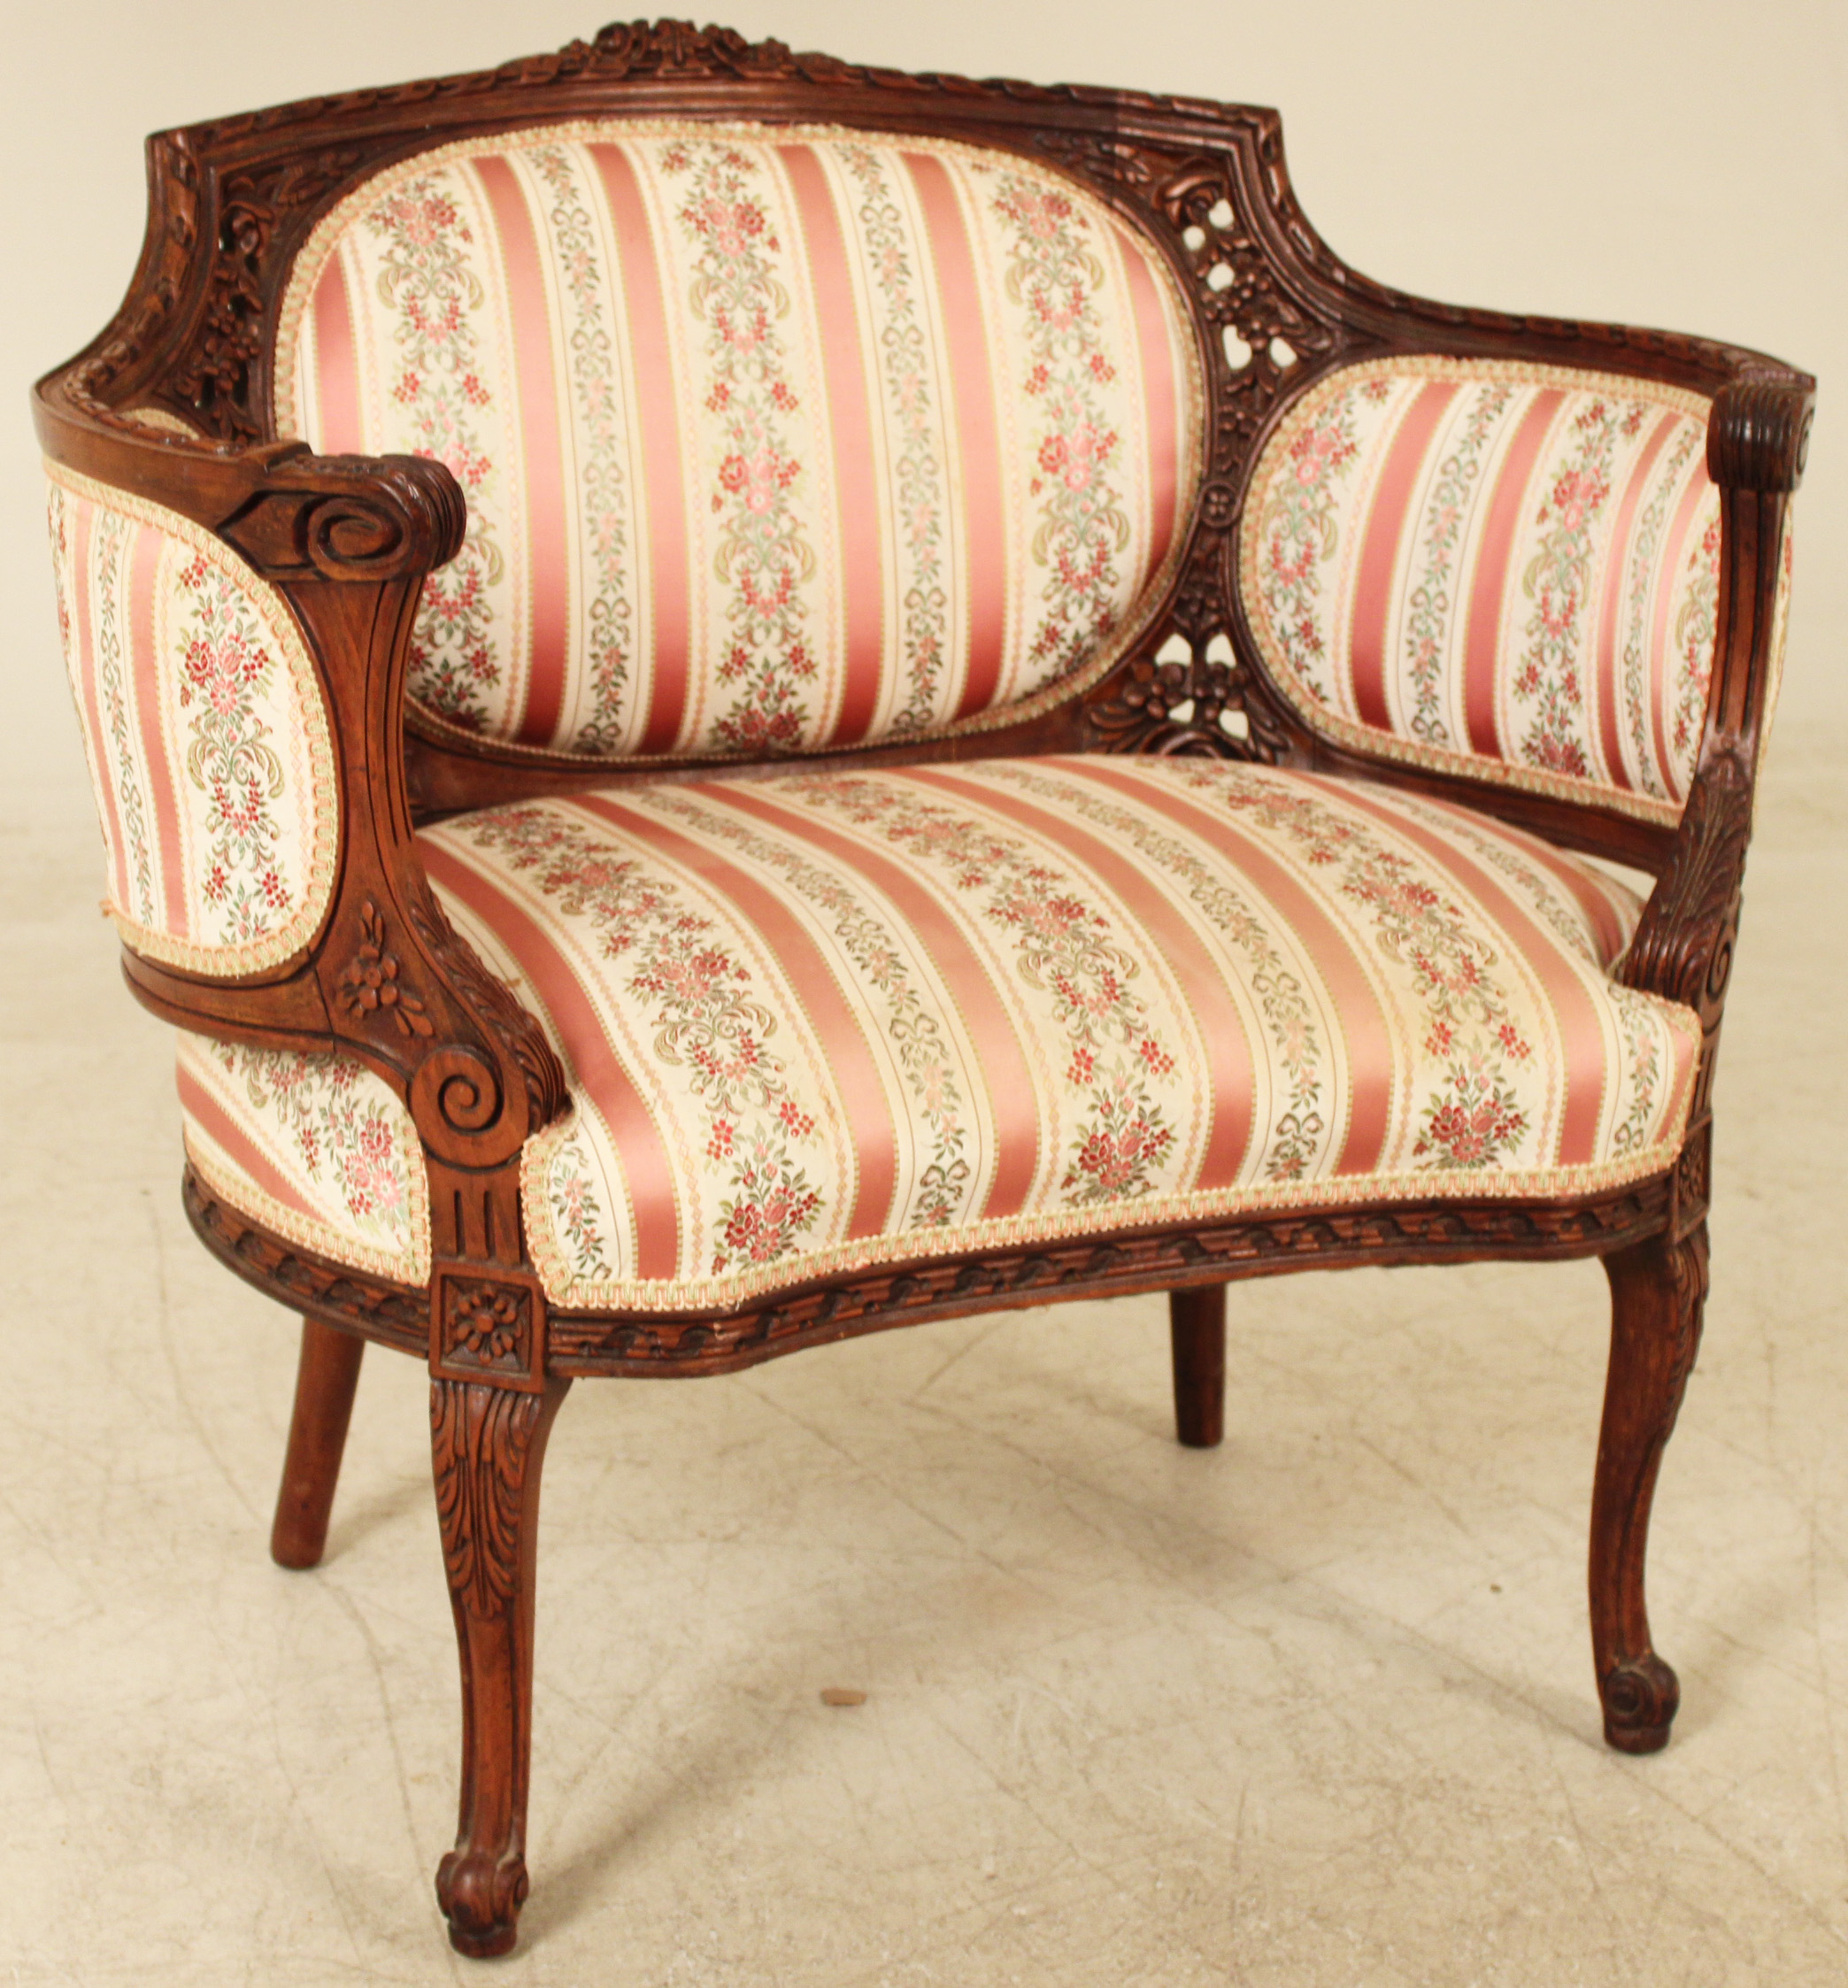 LOUIS XV STYLE CARVED WALNUT MARQUIS